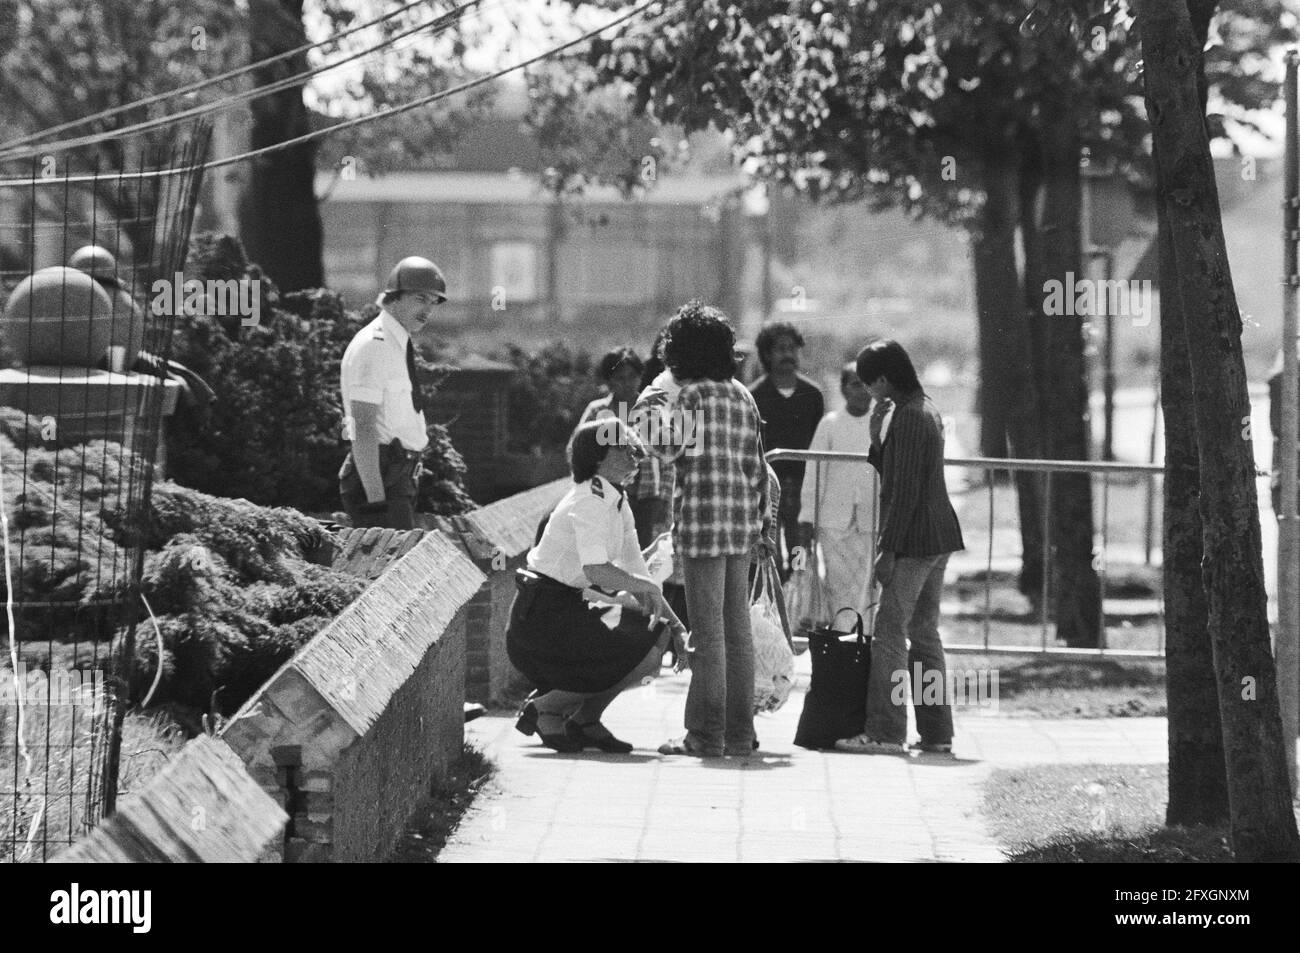 Fifth, sixth, seventh day hostage taking school Bovensmilde (Whitsun); South Moluccan children are searched by police, 28 May 1977, search, children, police, schools, The Netherlands, 20th century press agency photo, news to remember, documentary, historic photography 1945-1990, visual stories, human history of the Twentieth Century, capturing moments in time Stock Photo